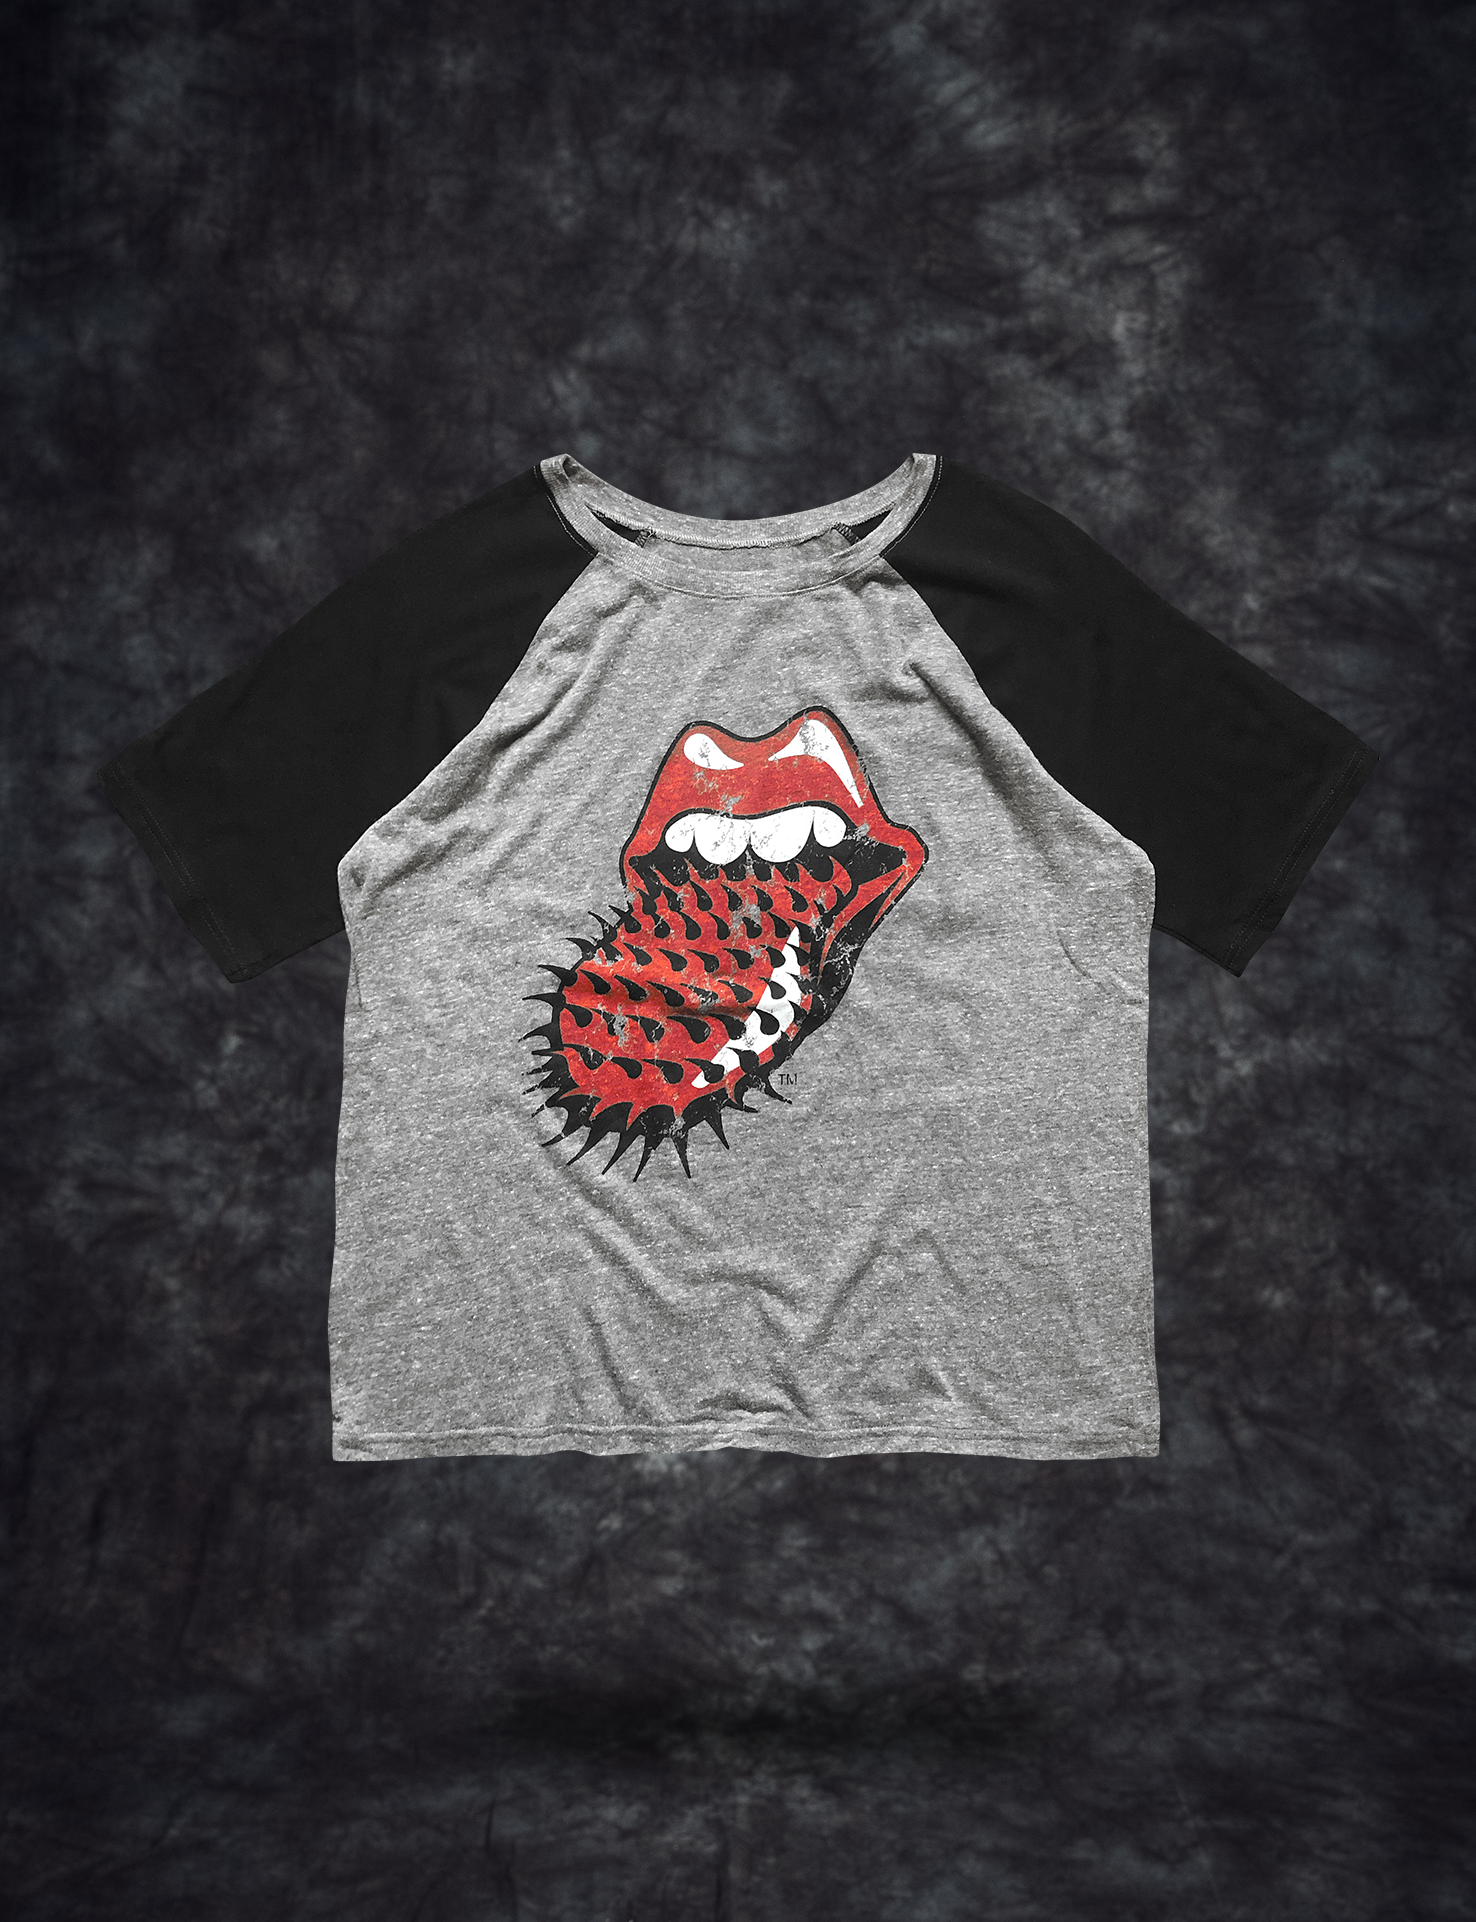 RS No. 9 Carnaby - Spiked Tongue Cropped Raglan